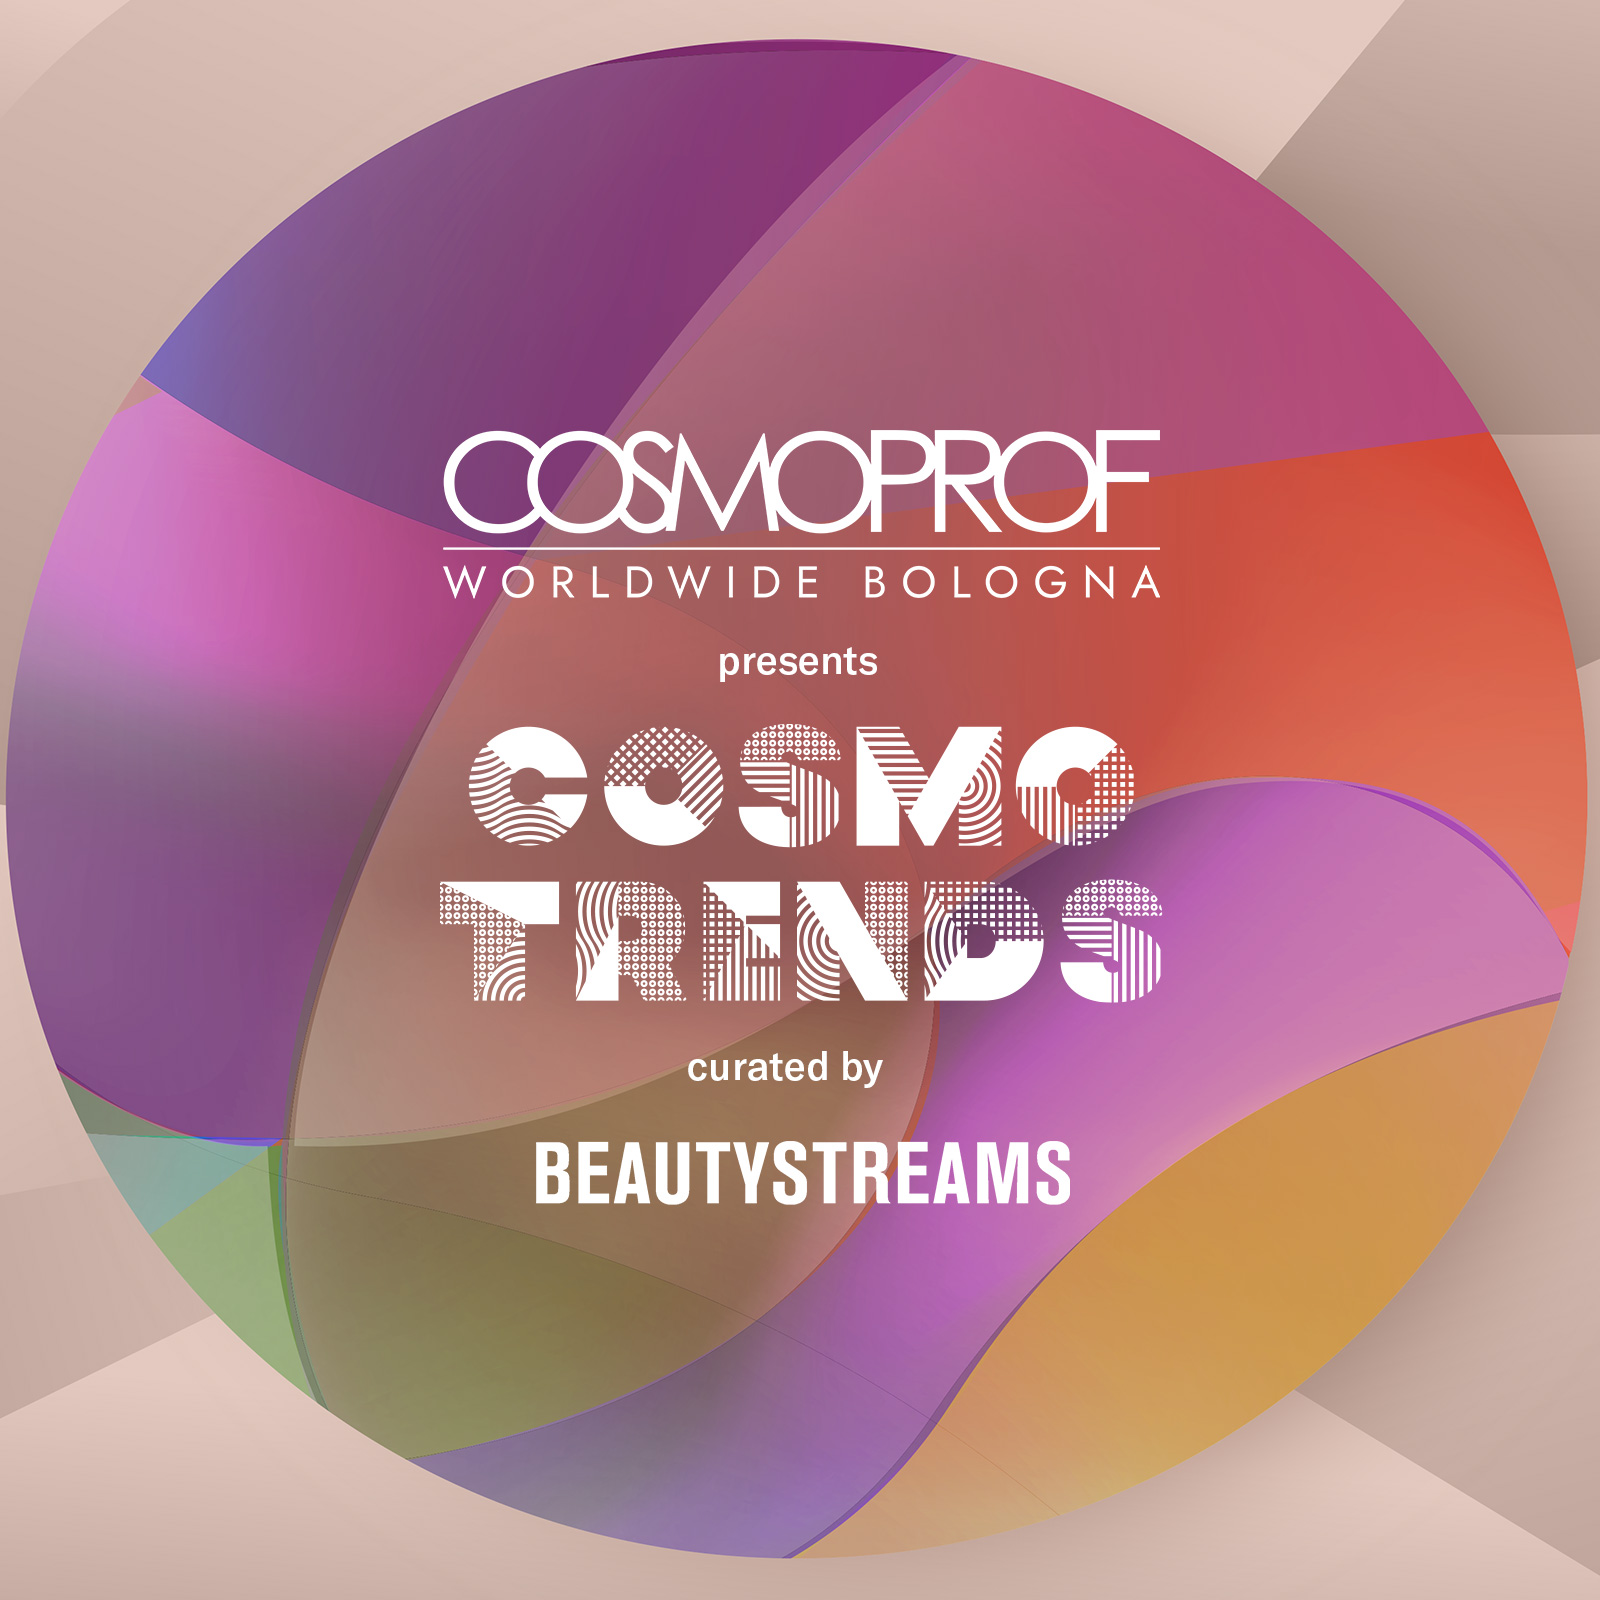 WHAT IS THE COSMOTRENDS REPORT?